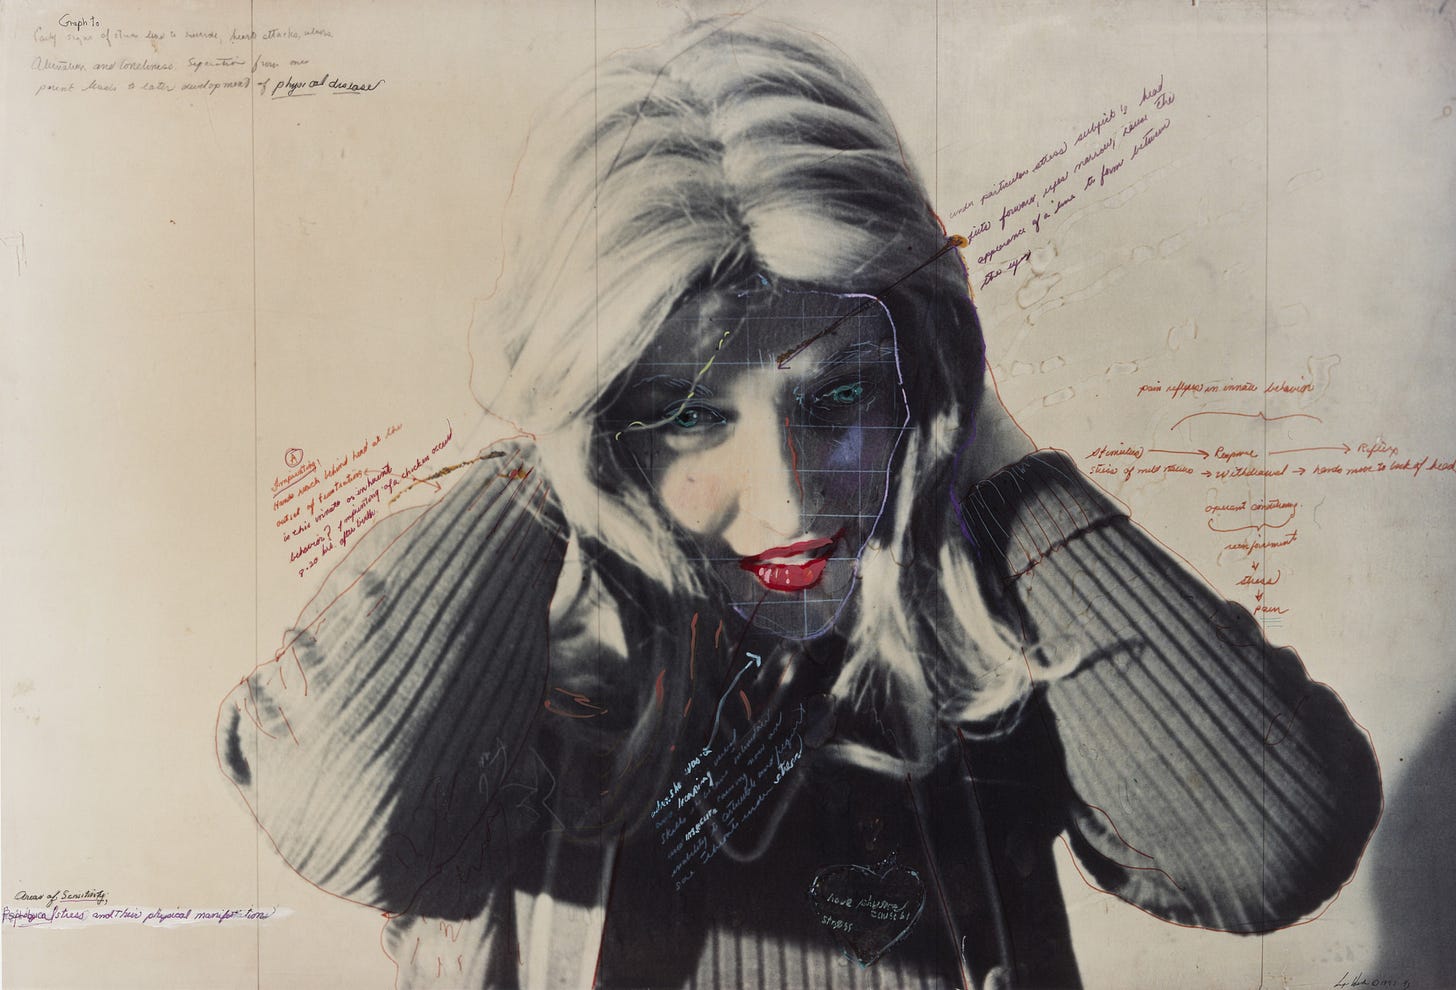 Lynn Hershman Leeson. Graph to Early Signs of Stress. 1975 | MoMA